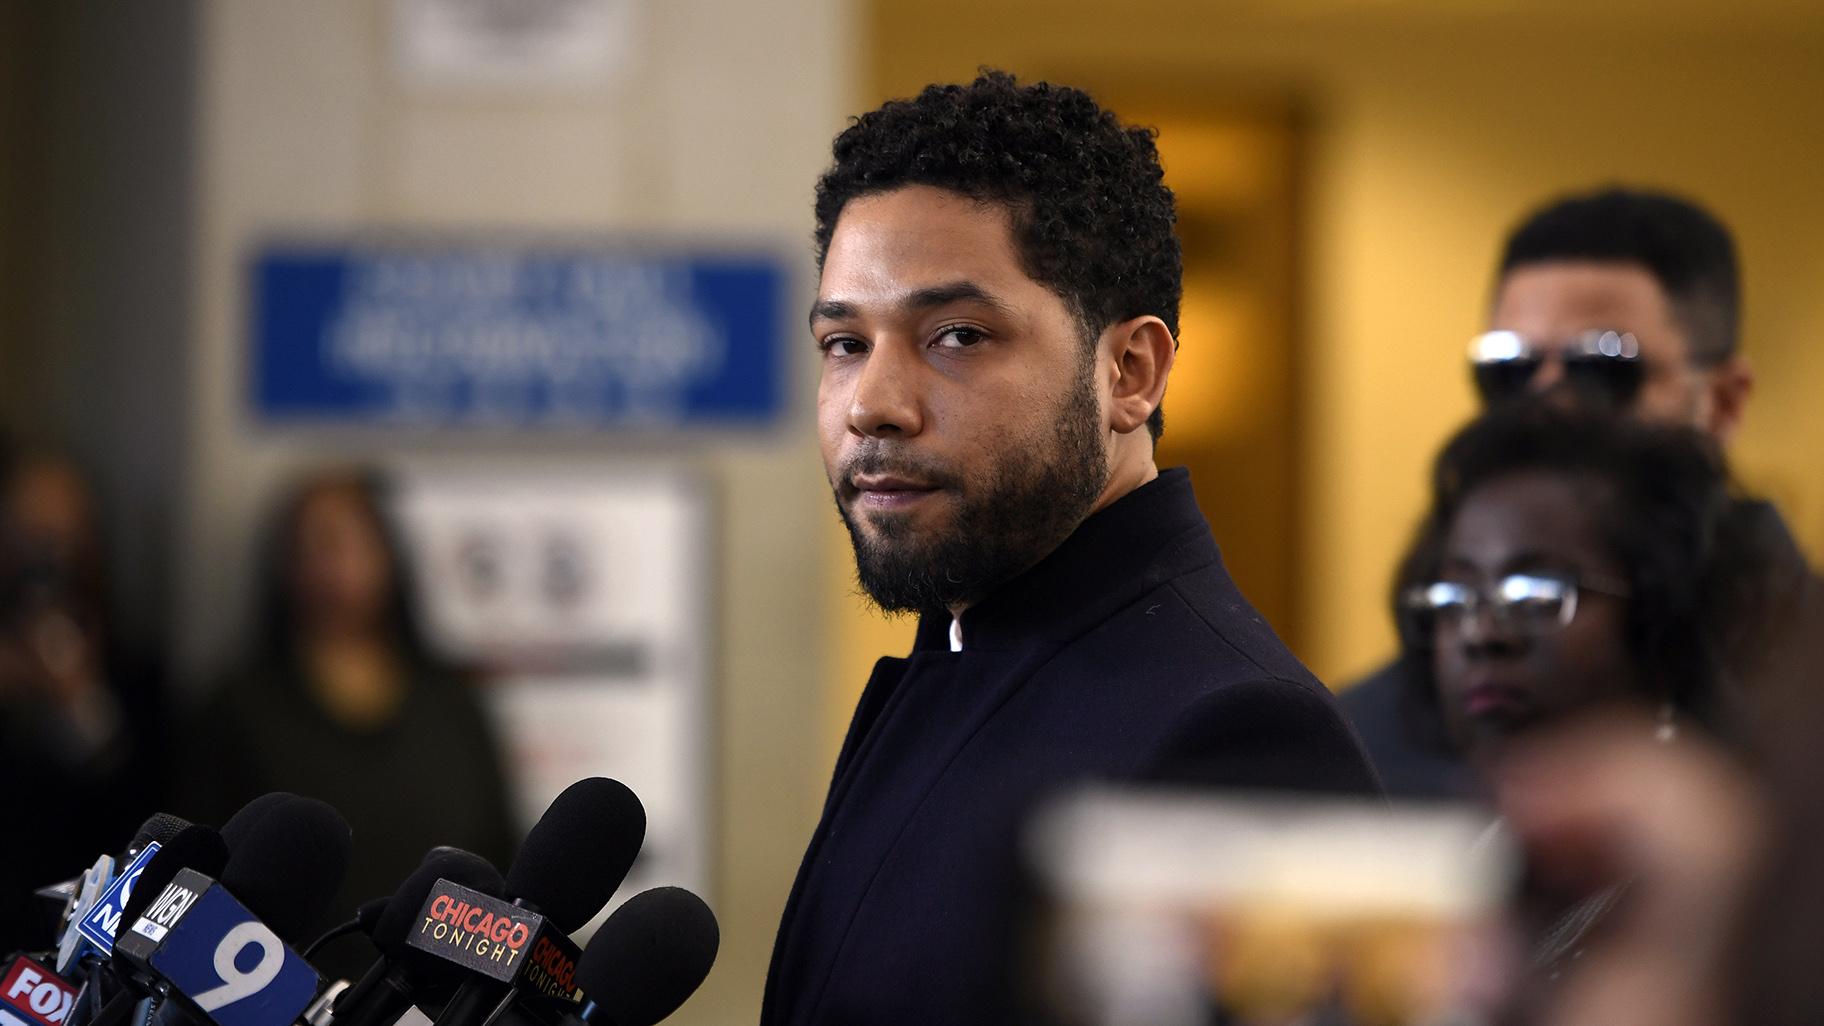 Actor Jussie Smollett talks to the media before leaving Cook County Court after his charges were dropped, Tuesday, March 26, 2019. (AP Photo / Paul Beaty)